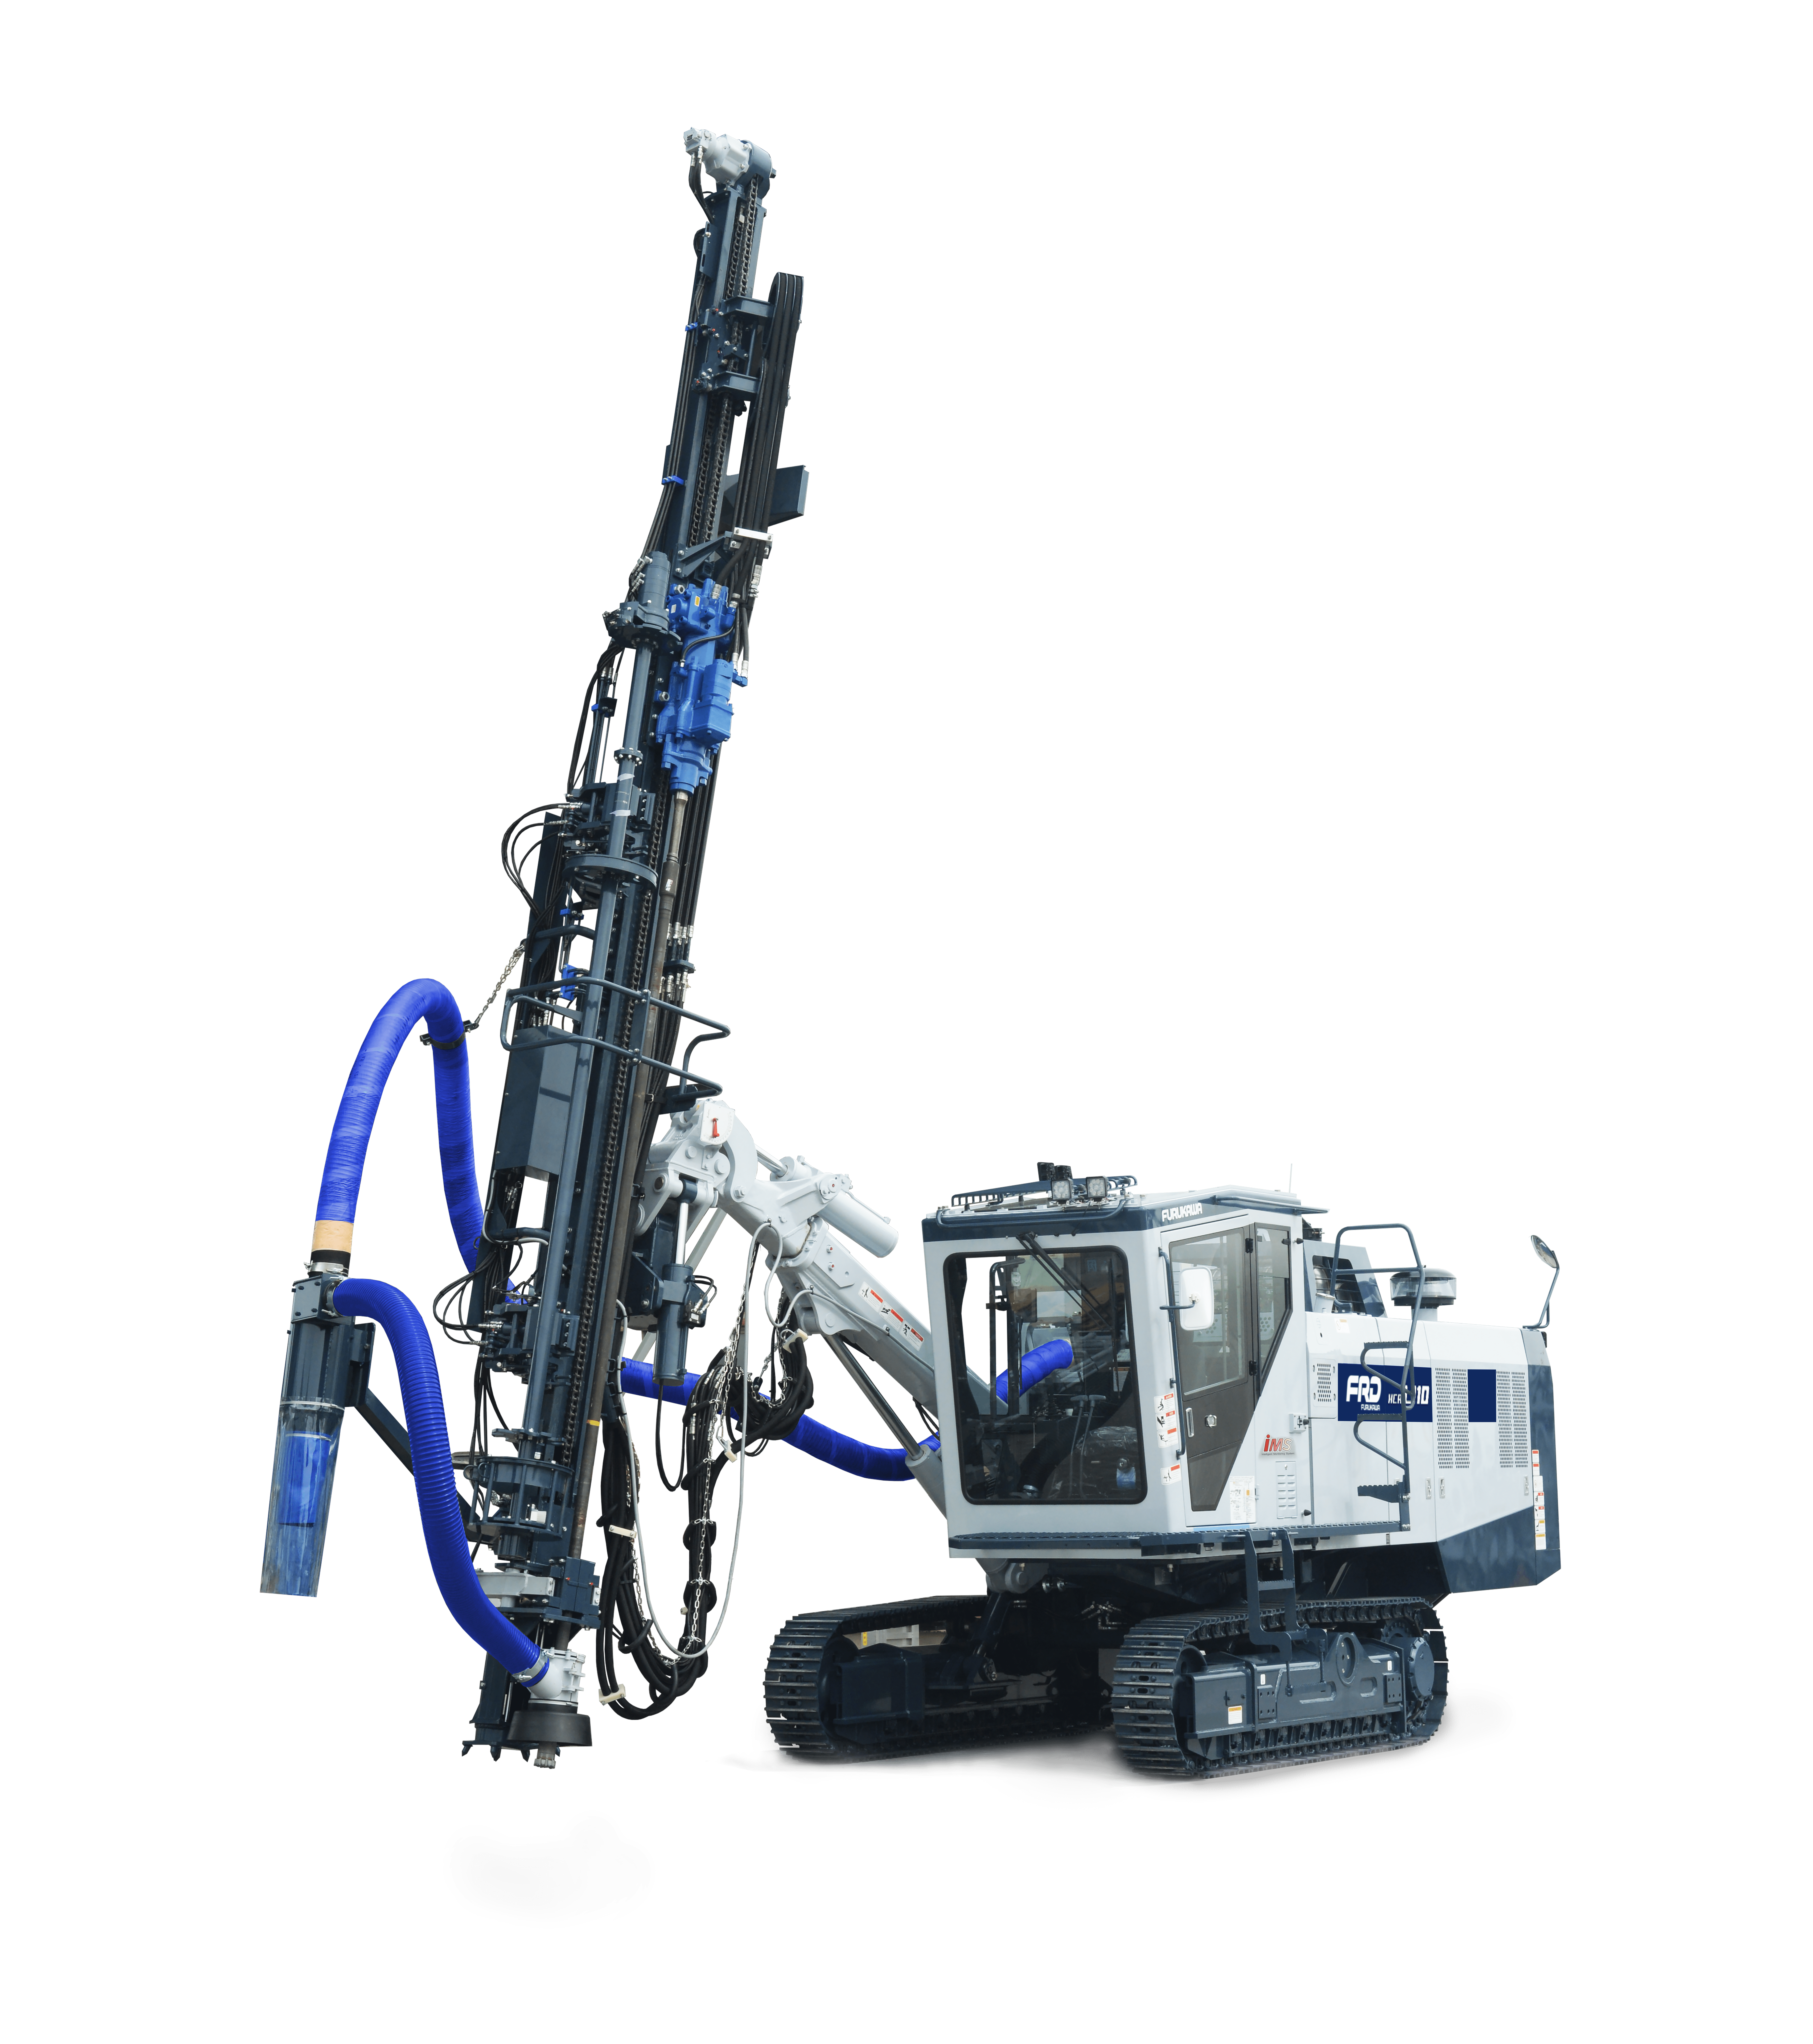 Furukawa FRD USA offers top hammer rock drills w/ low emission, Tier-IV engines, meeting strict North American exhaust regulations. Tier IV Top Hammer Drills are the pinnacle of rock drilling performance!